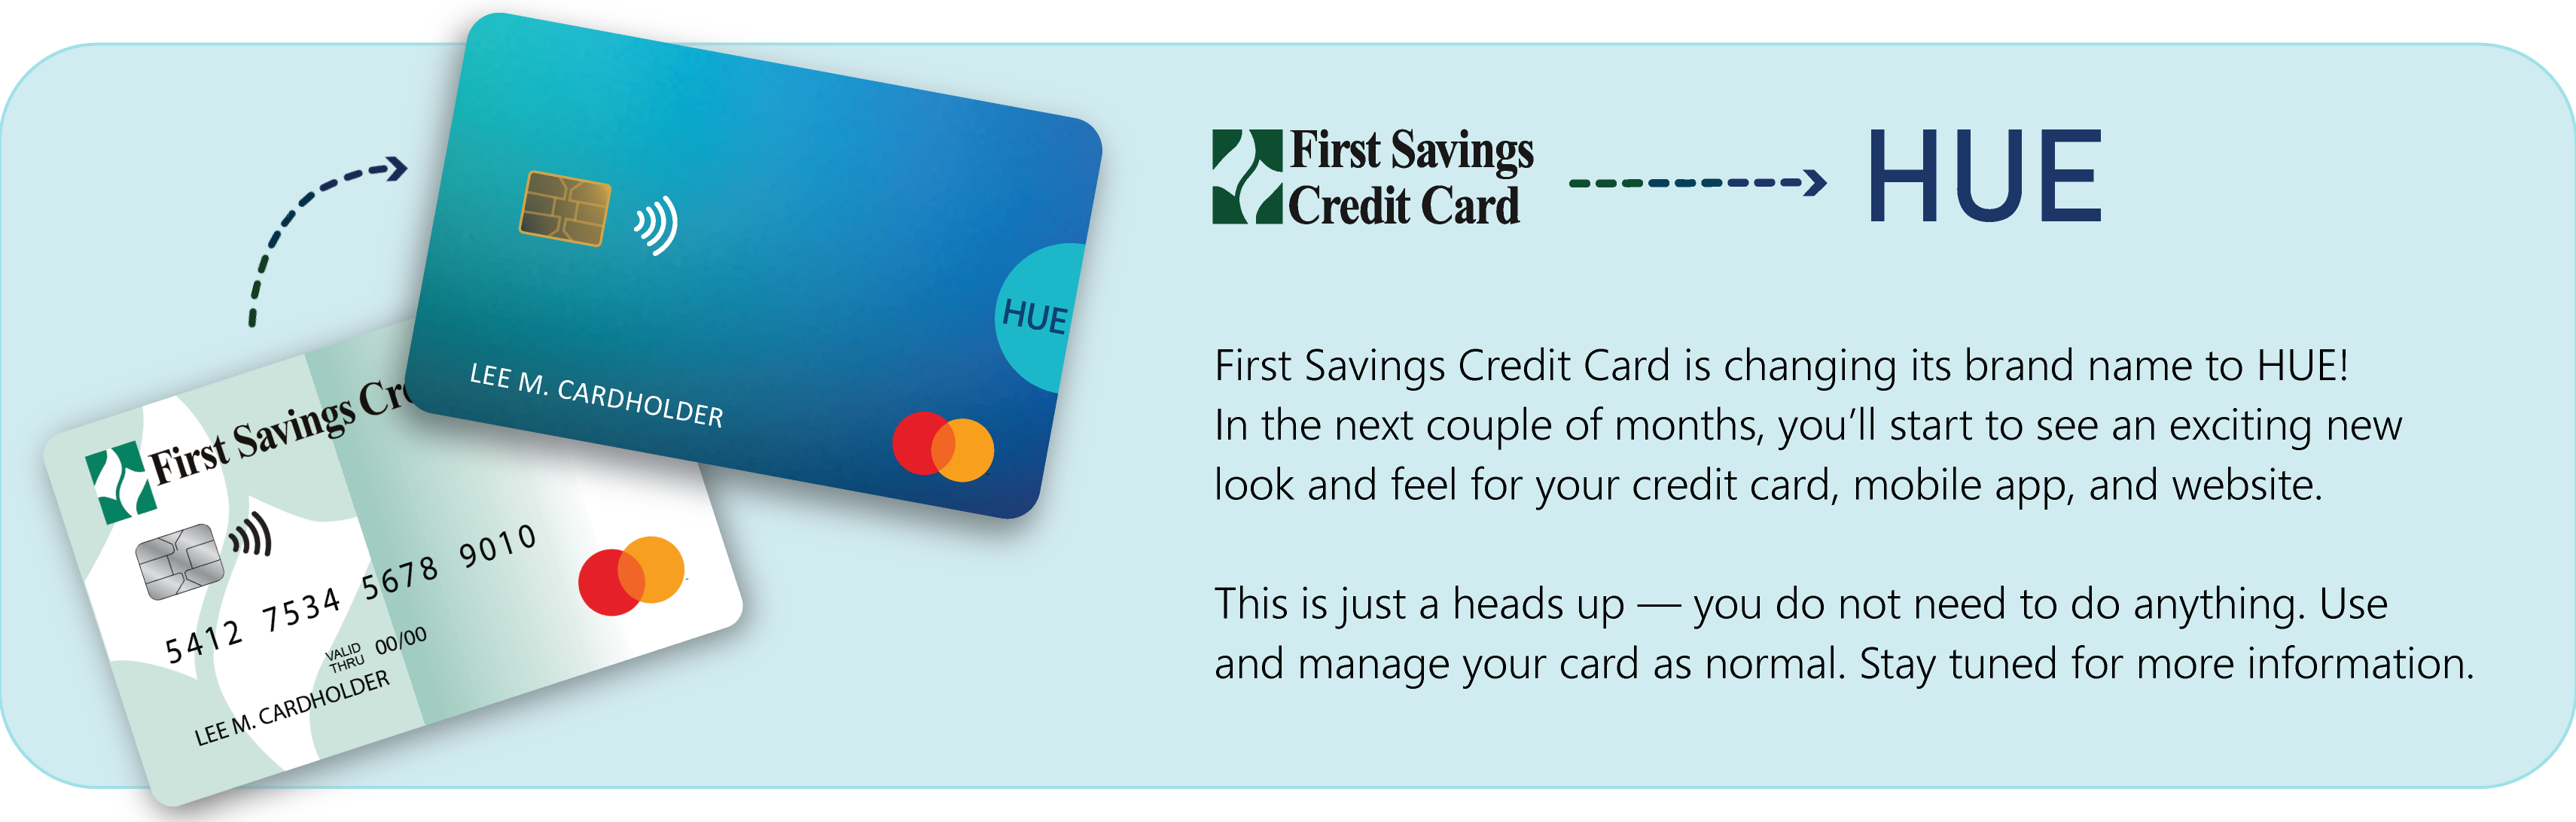 Picture of First Savings Credit Card changing to HUE Credit Card.
 
First Savings Credit Card is changing its brand name to HUE!  In the next couple of months, you'll start to see an exciting new look and feel for your credit card, mobile app, and website.
 
This is just a heads up – you do not need to do anything.  Use and manage your card as normal.  Stay tuned for more information.